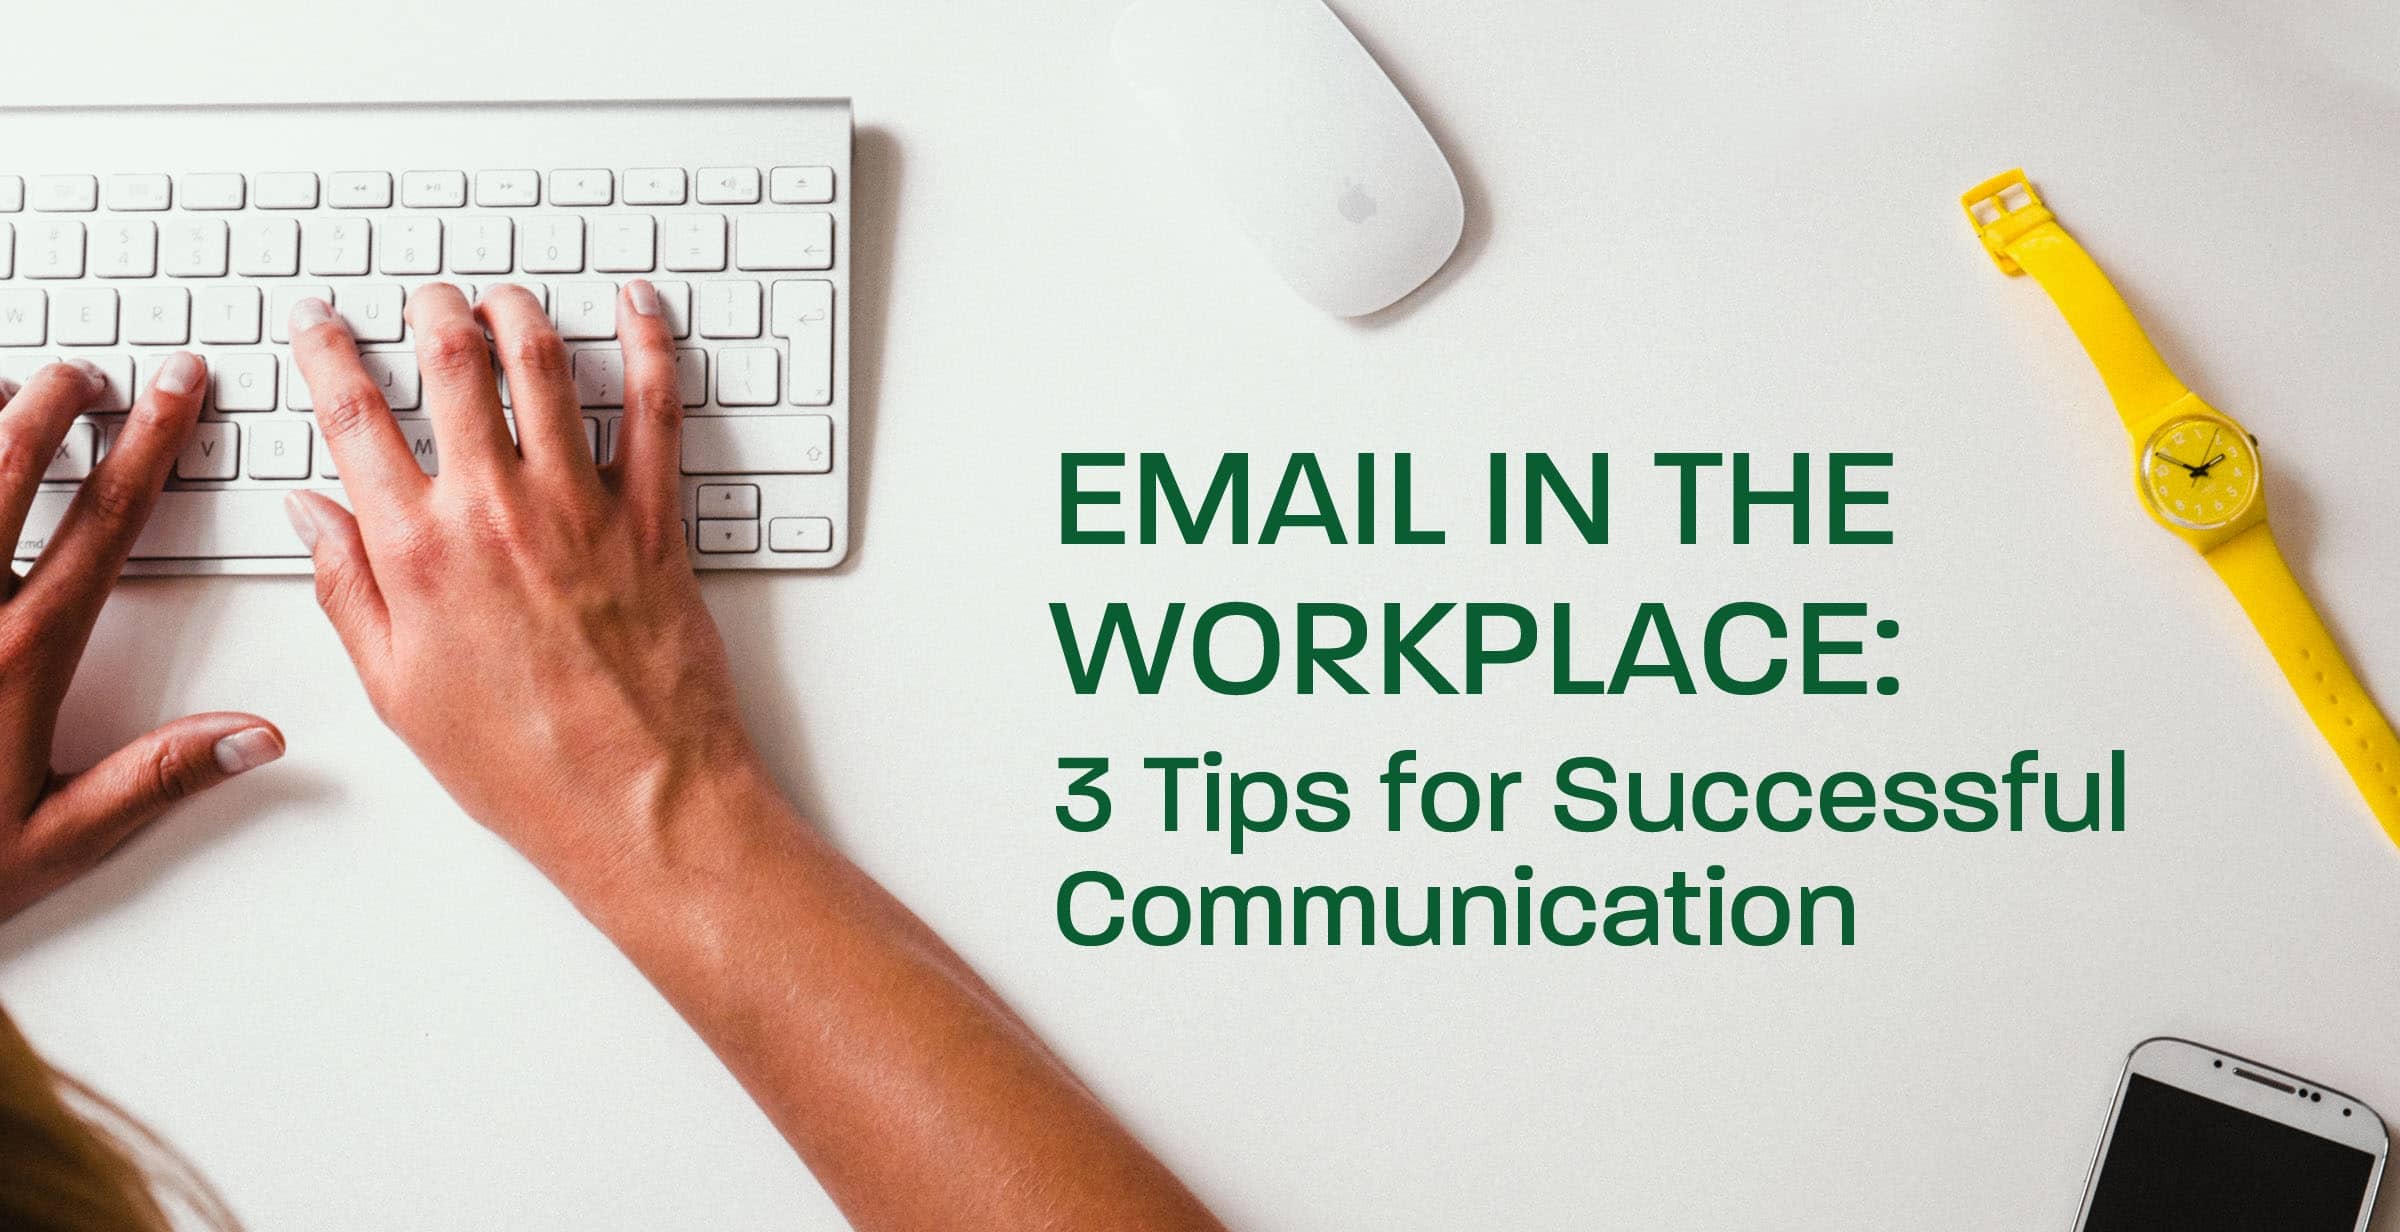 Email in the Workplace: 3 Tips for Successful Communication